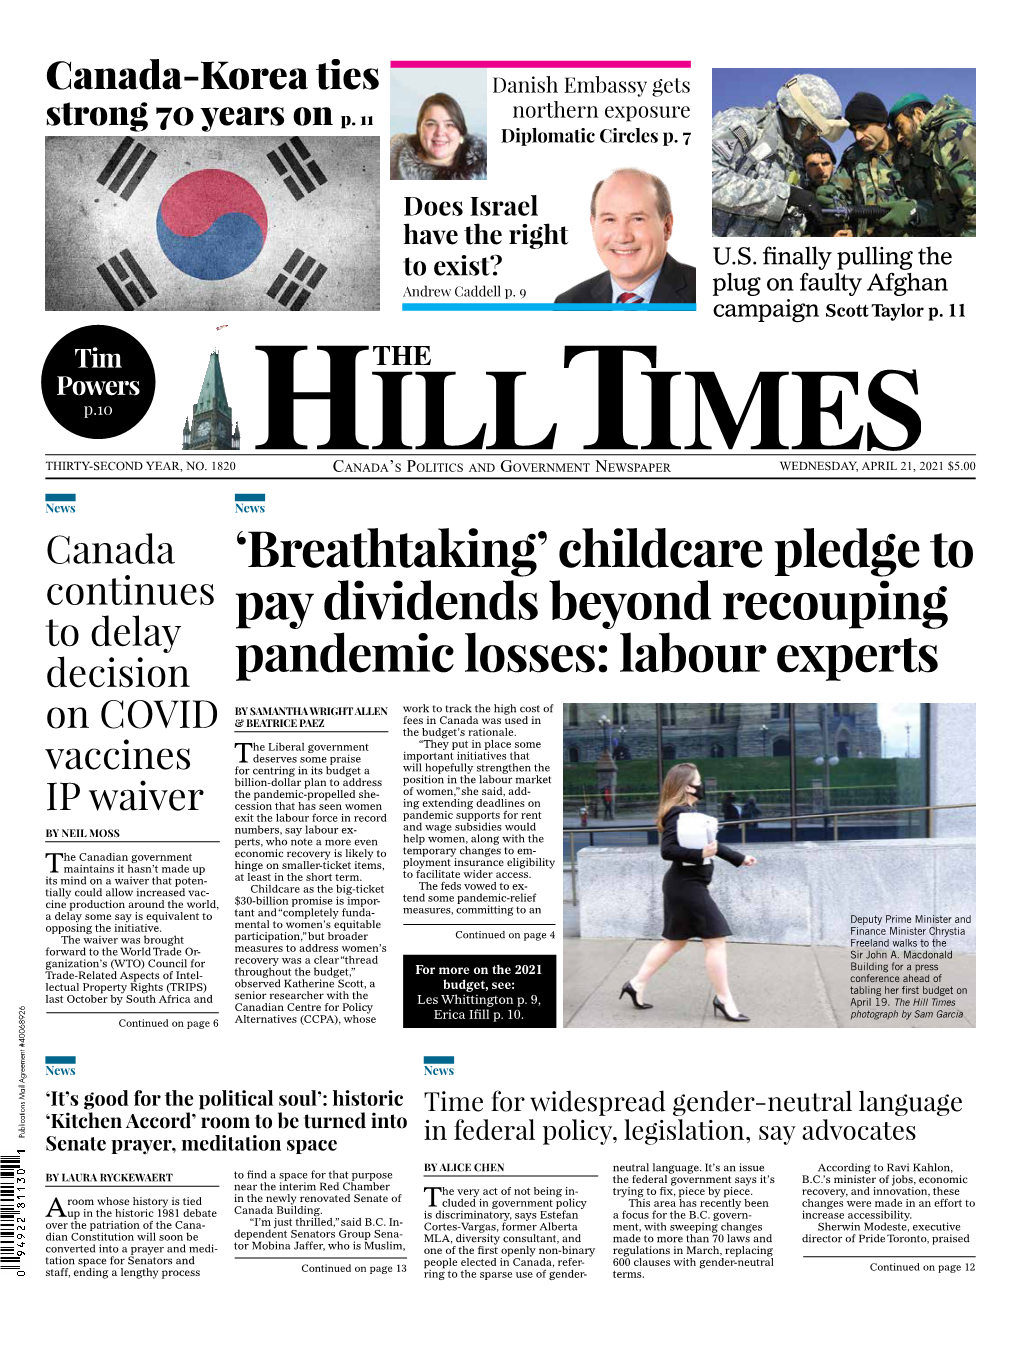 Childcare Pledge to Pay Dividends Beyond Recouping Pandemic Losses